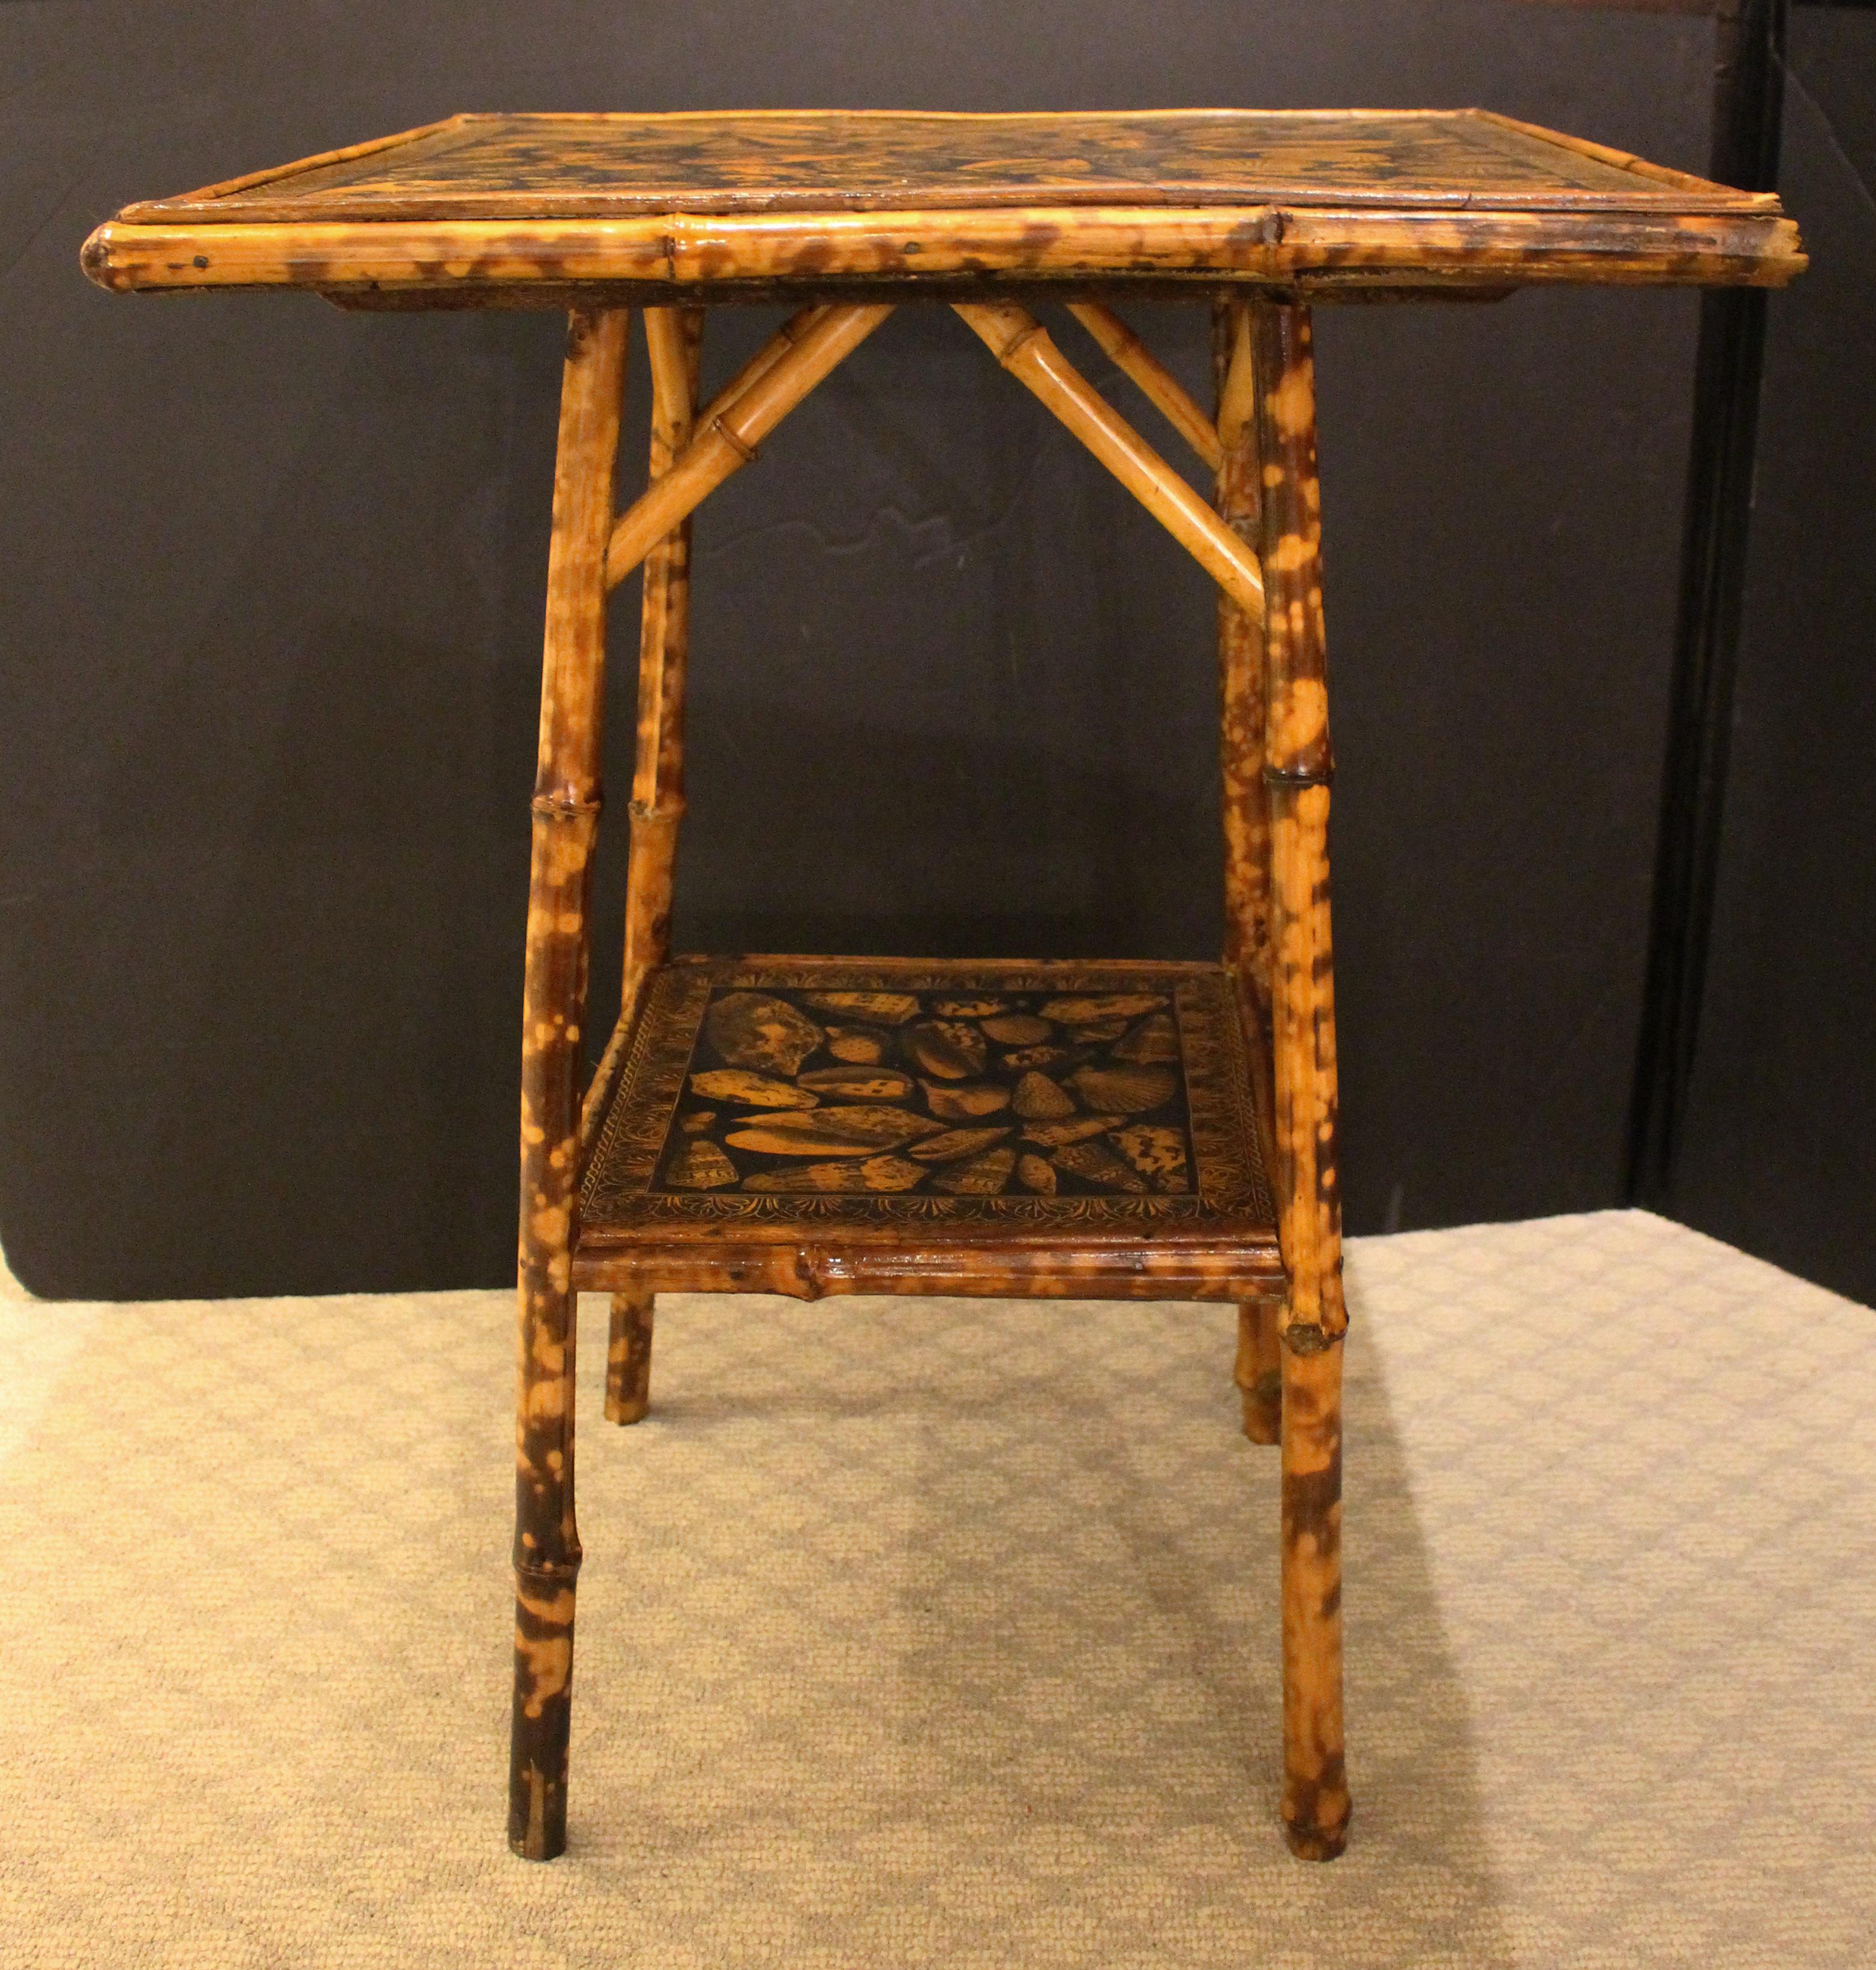 Late 19th century English 2-tier bamboo side table of large square size. Now decoupaged with shells & neoclassical borders. Well figured bamboo. 20.5